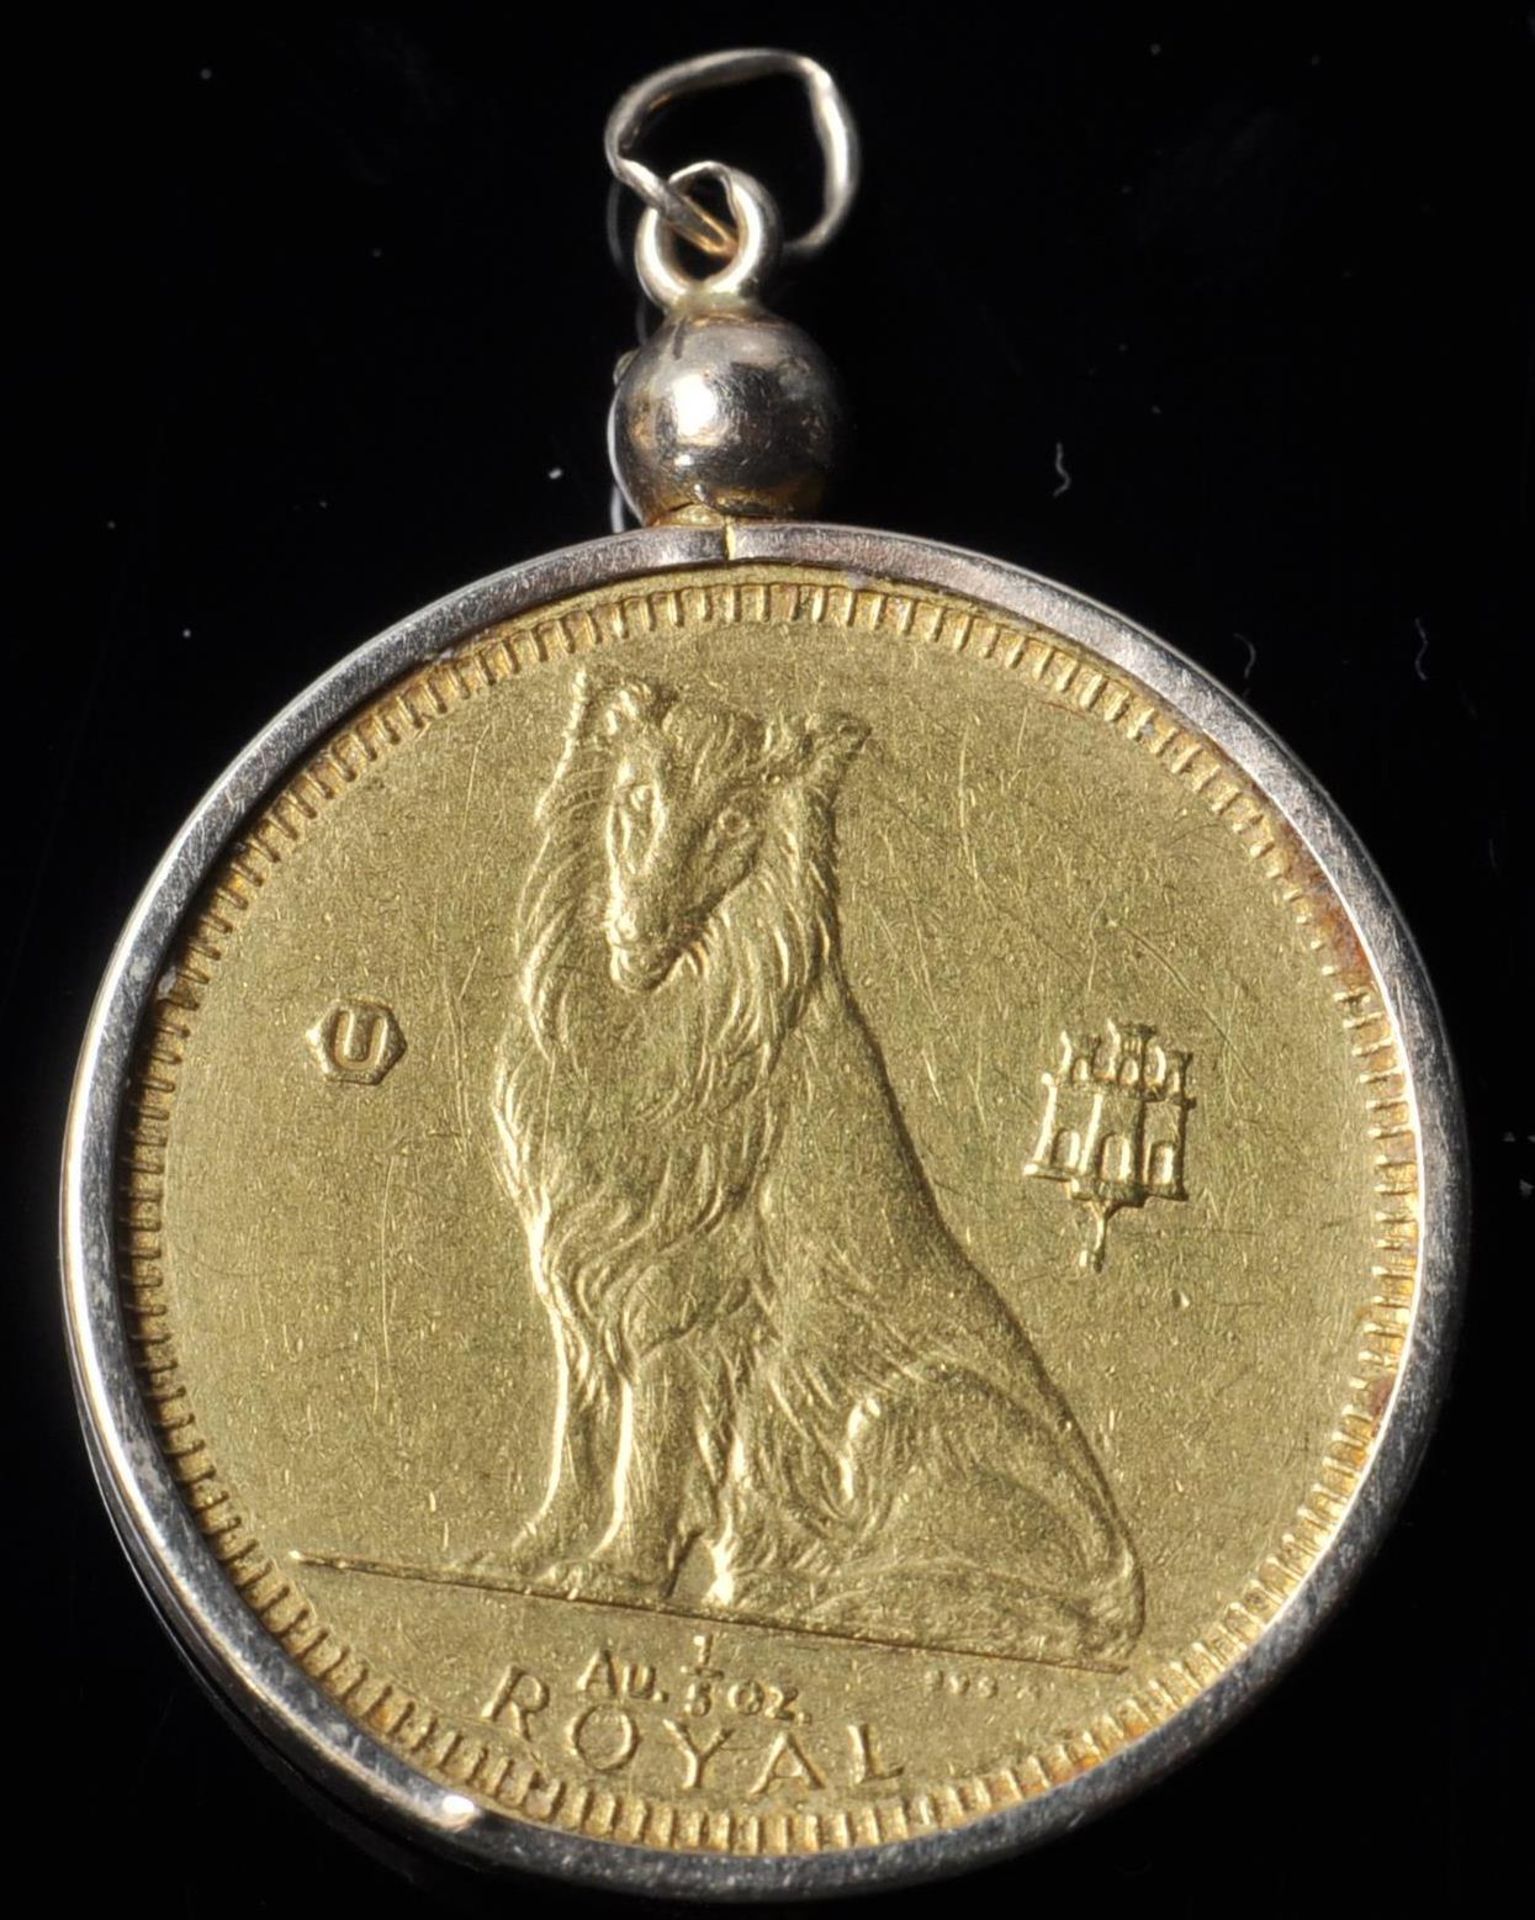 A 1995 Gibralter Collie dog 999 fine gold coin set within a 14ct gold coin mount. Coin marked 999